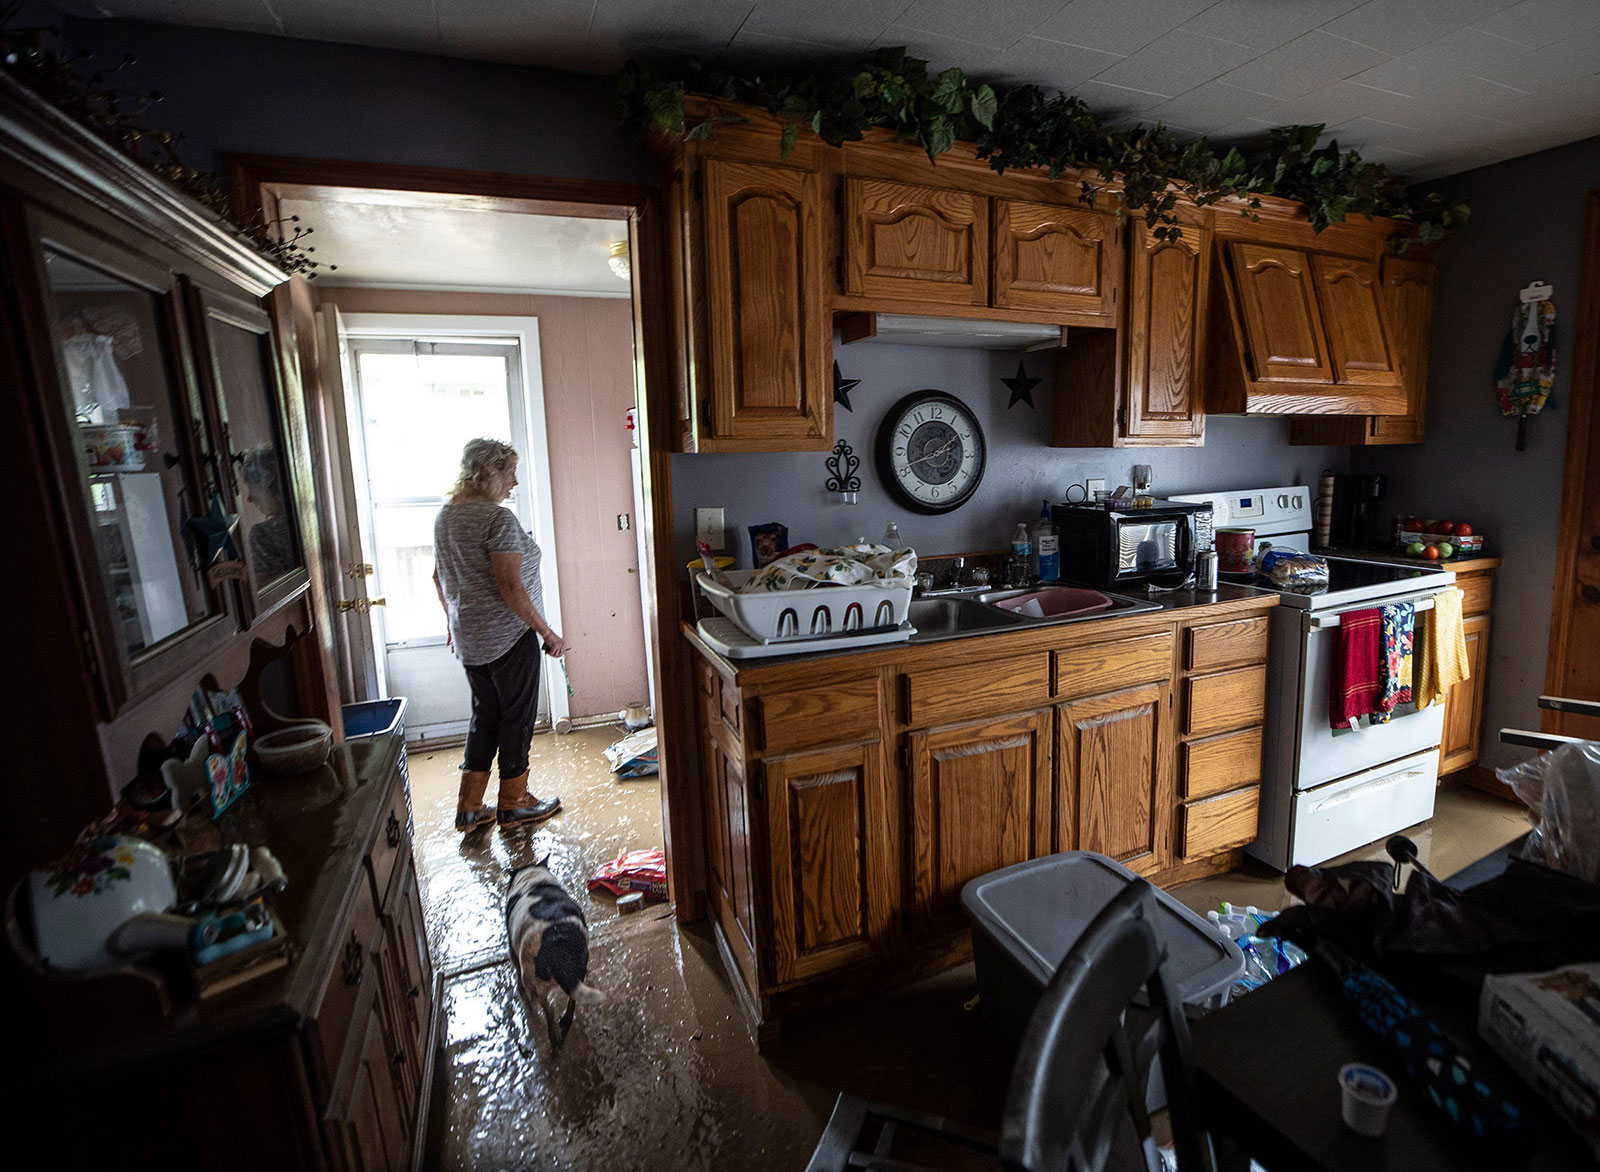 Pam Boling surveys the damage to her home from floodwaters in Wayland, Kentucky, following a day of heavy rain on July 28.